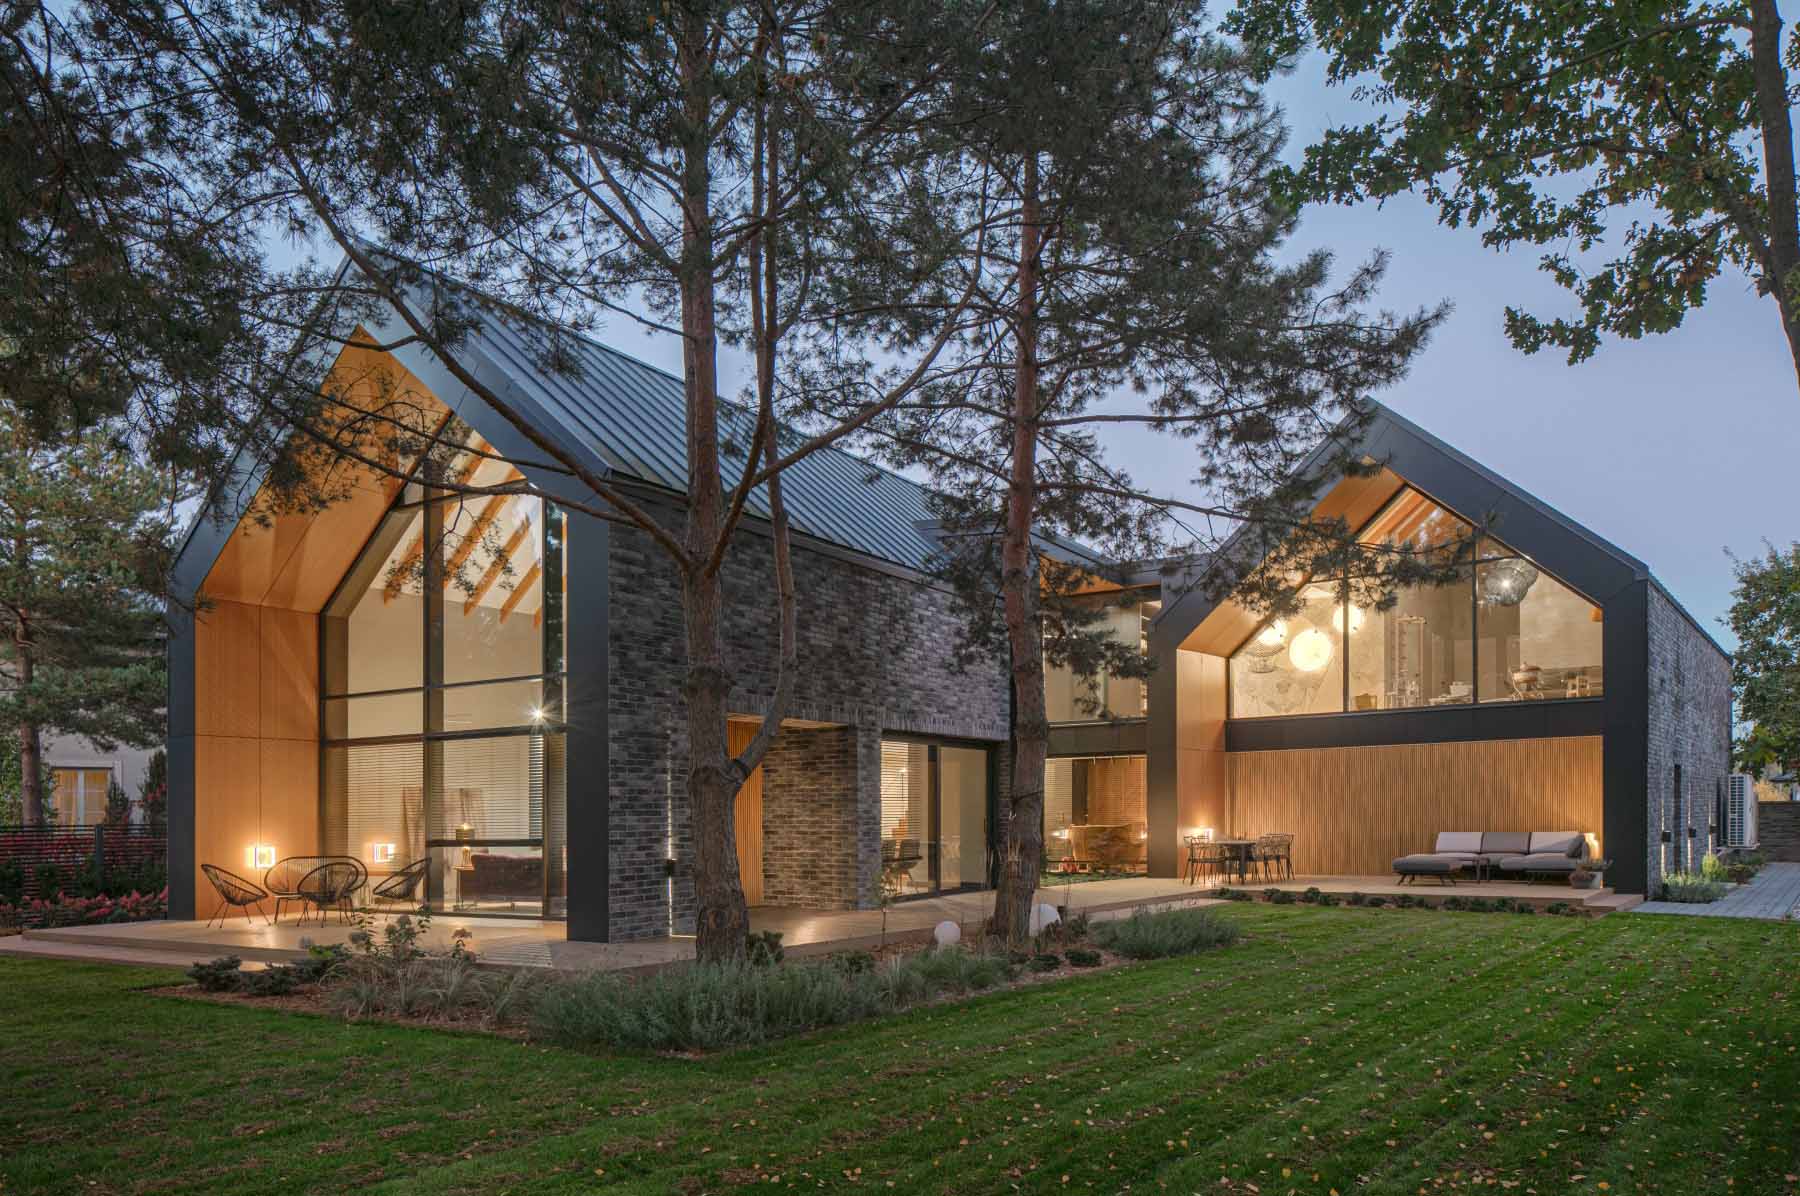 Double Barn is a designer house, but at the same time is durable and timeless, as it is firmly rooted in local tradition and adapted to the context of nature.